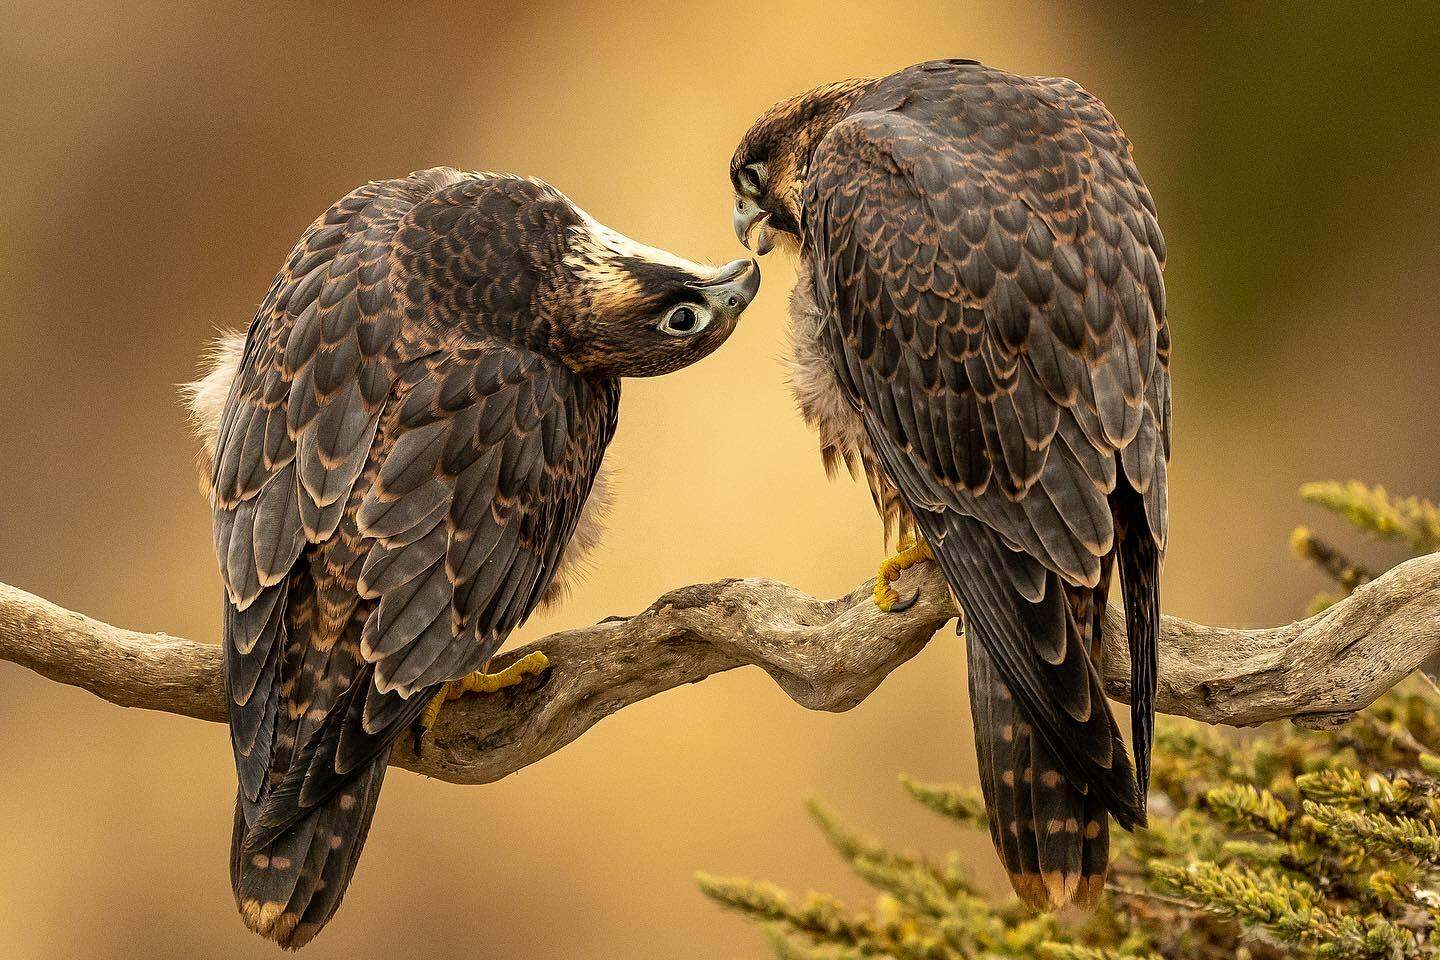 A pair of juvenile peregrine falcons grooming each other. 